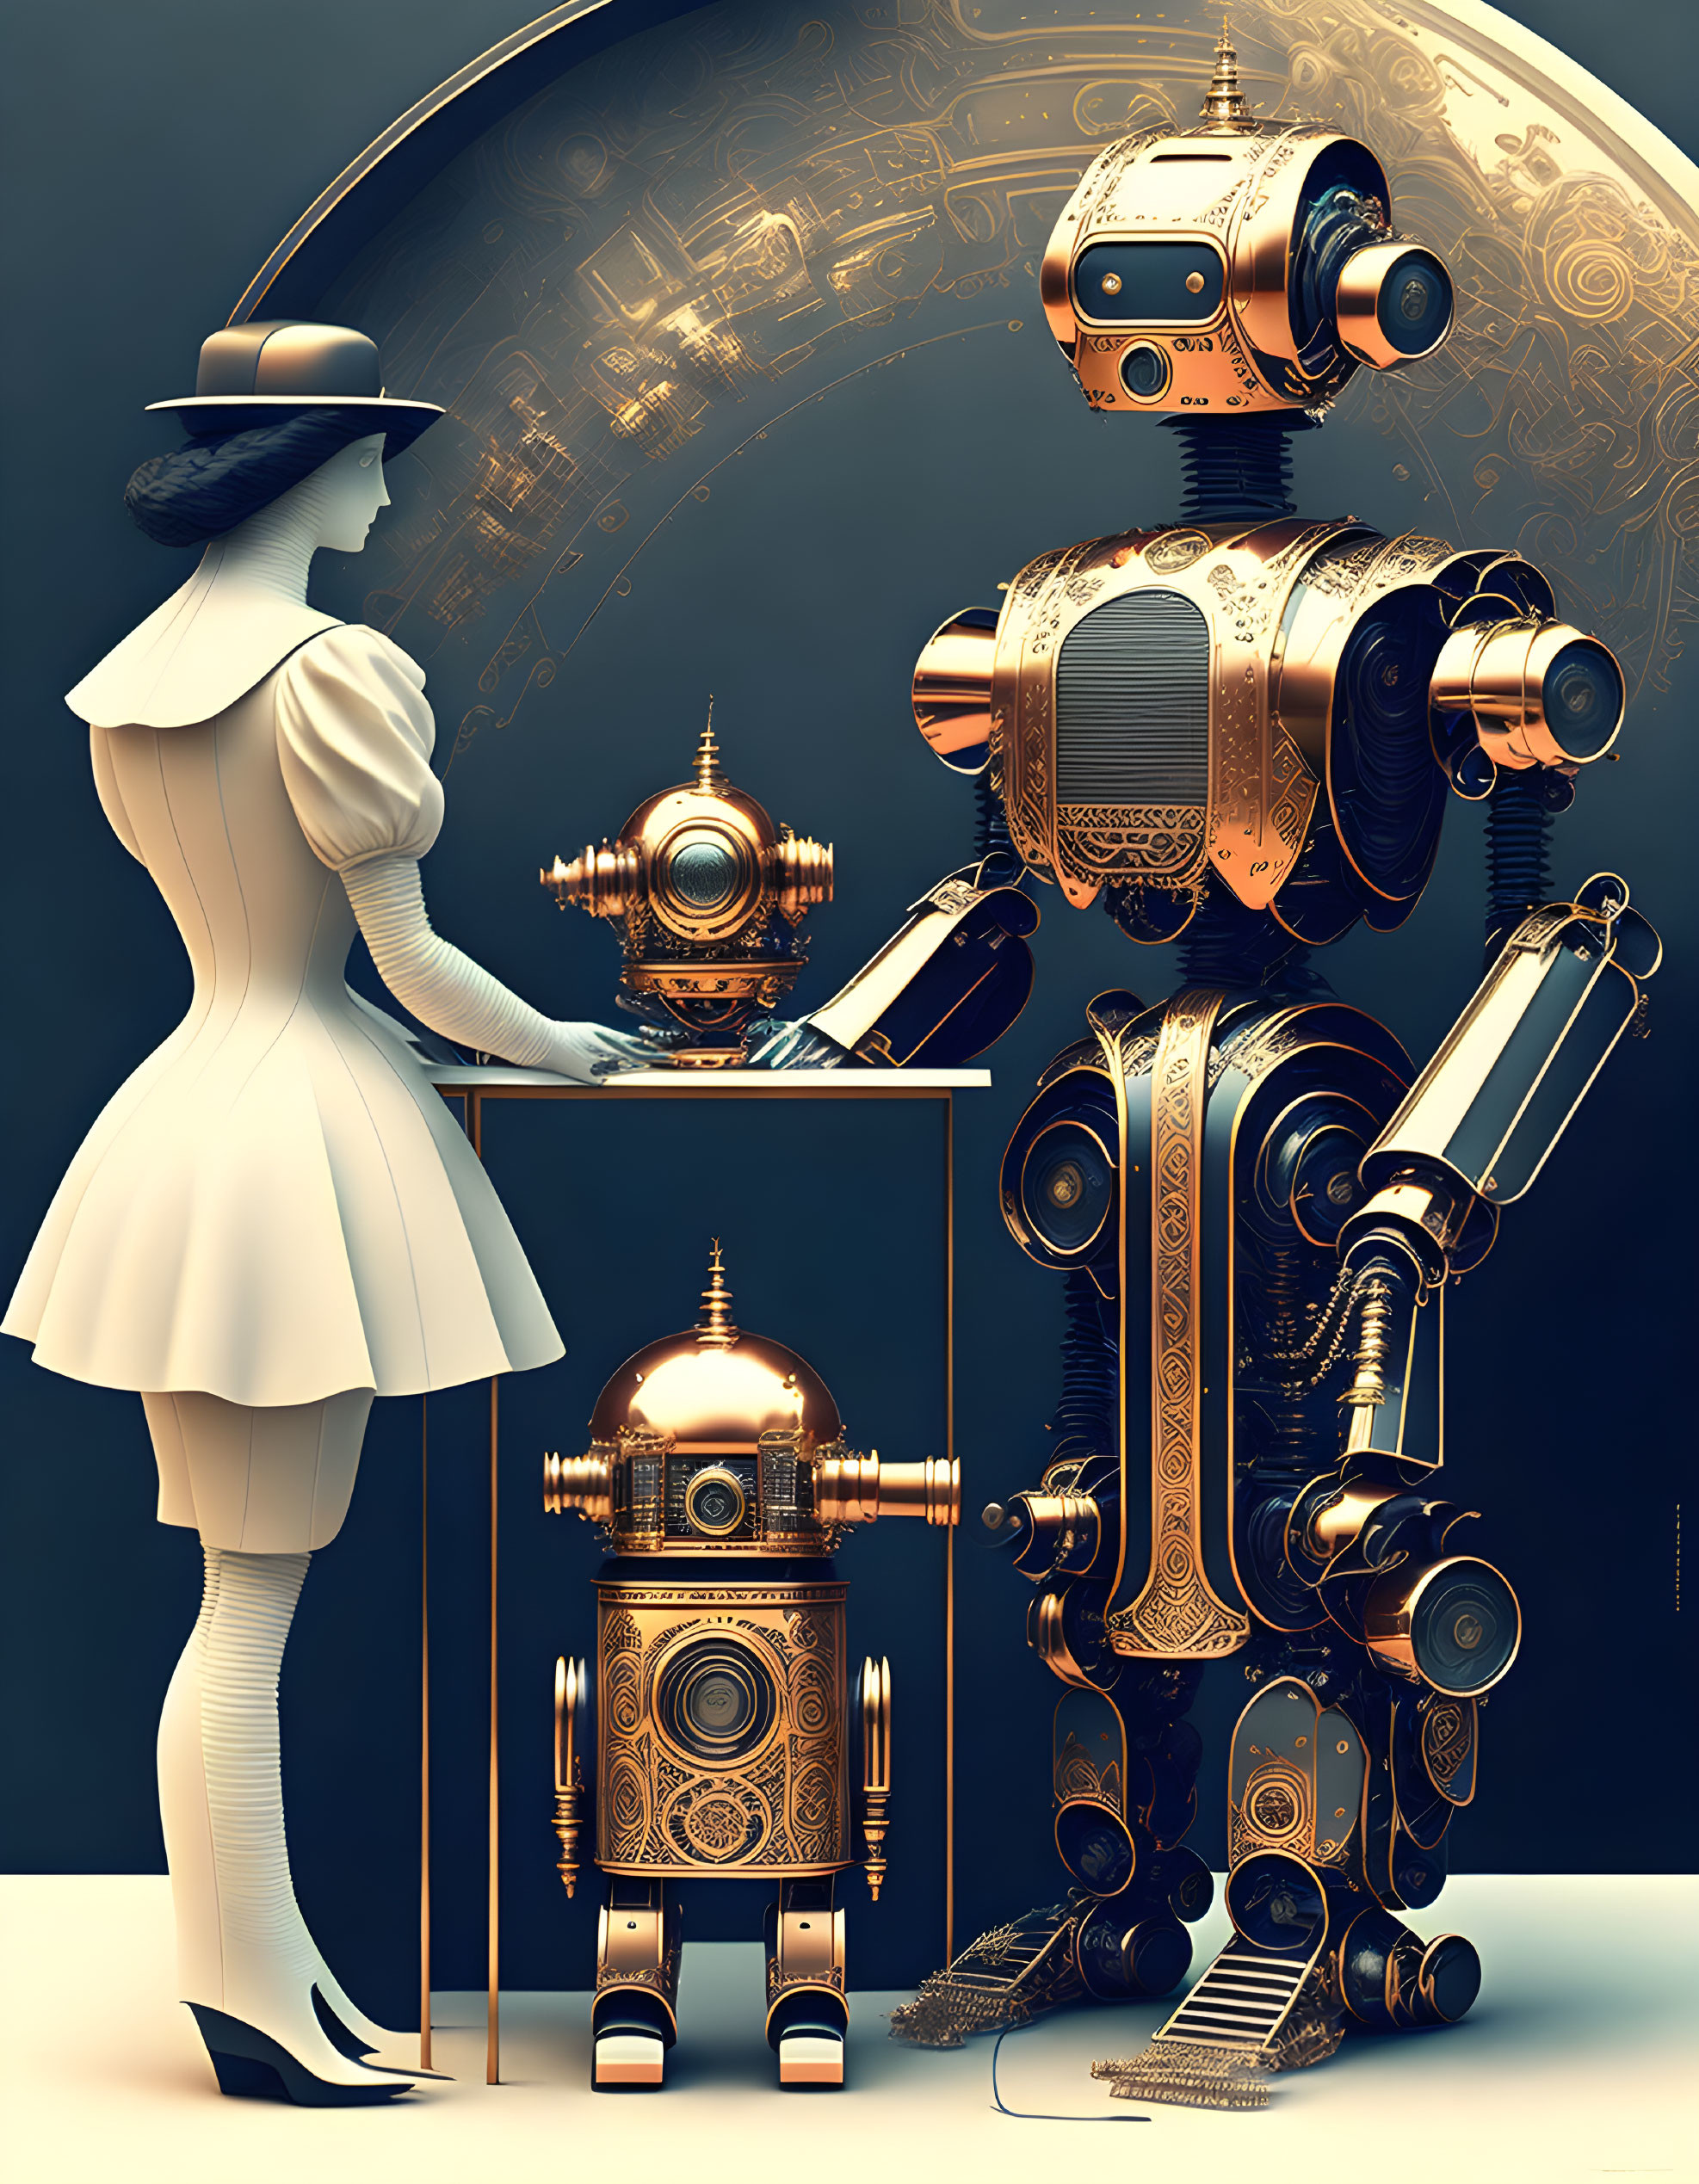 Woman in white outfit with steampunk robots against mechanical backdrop